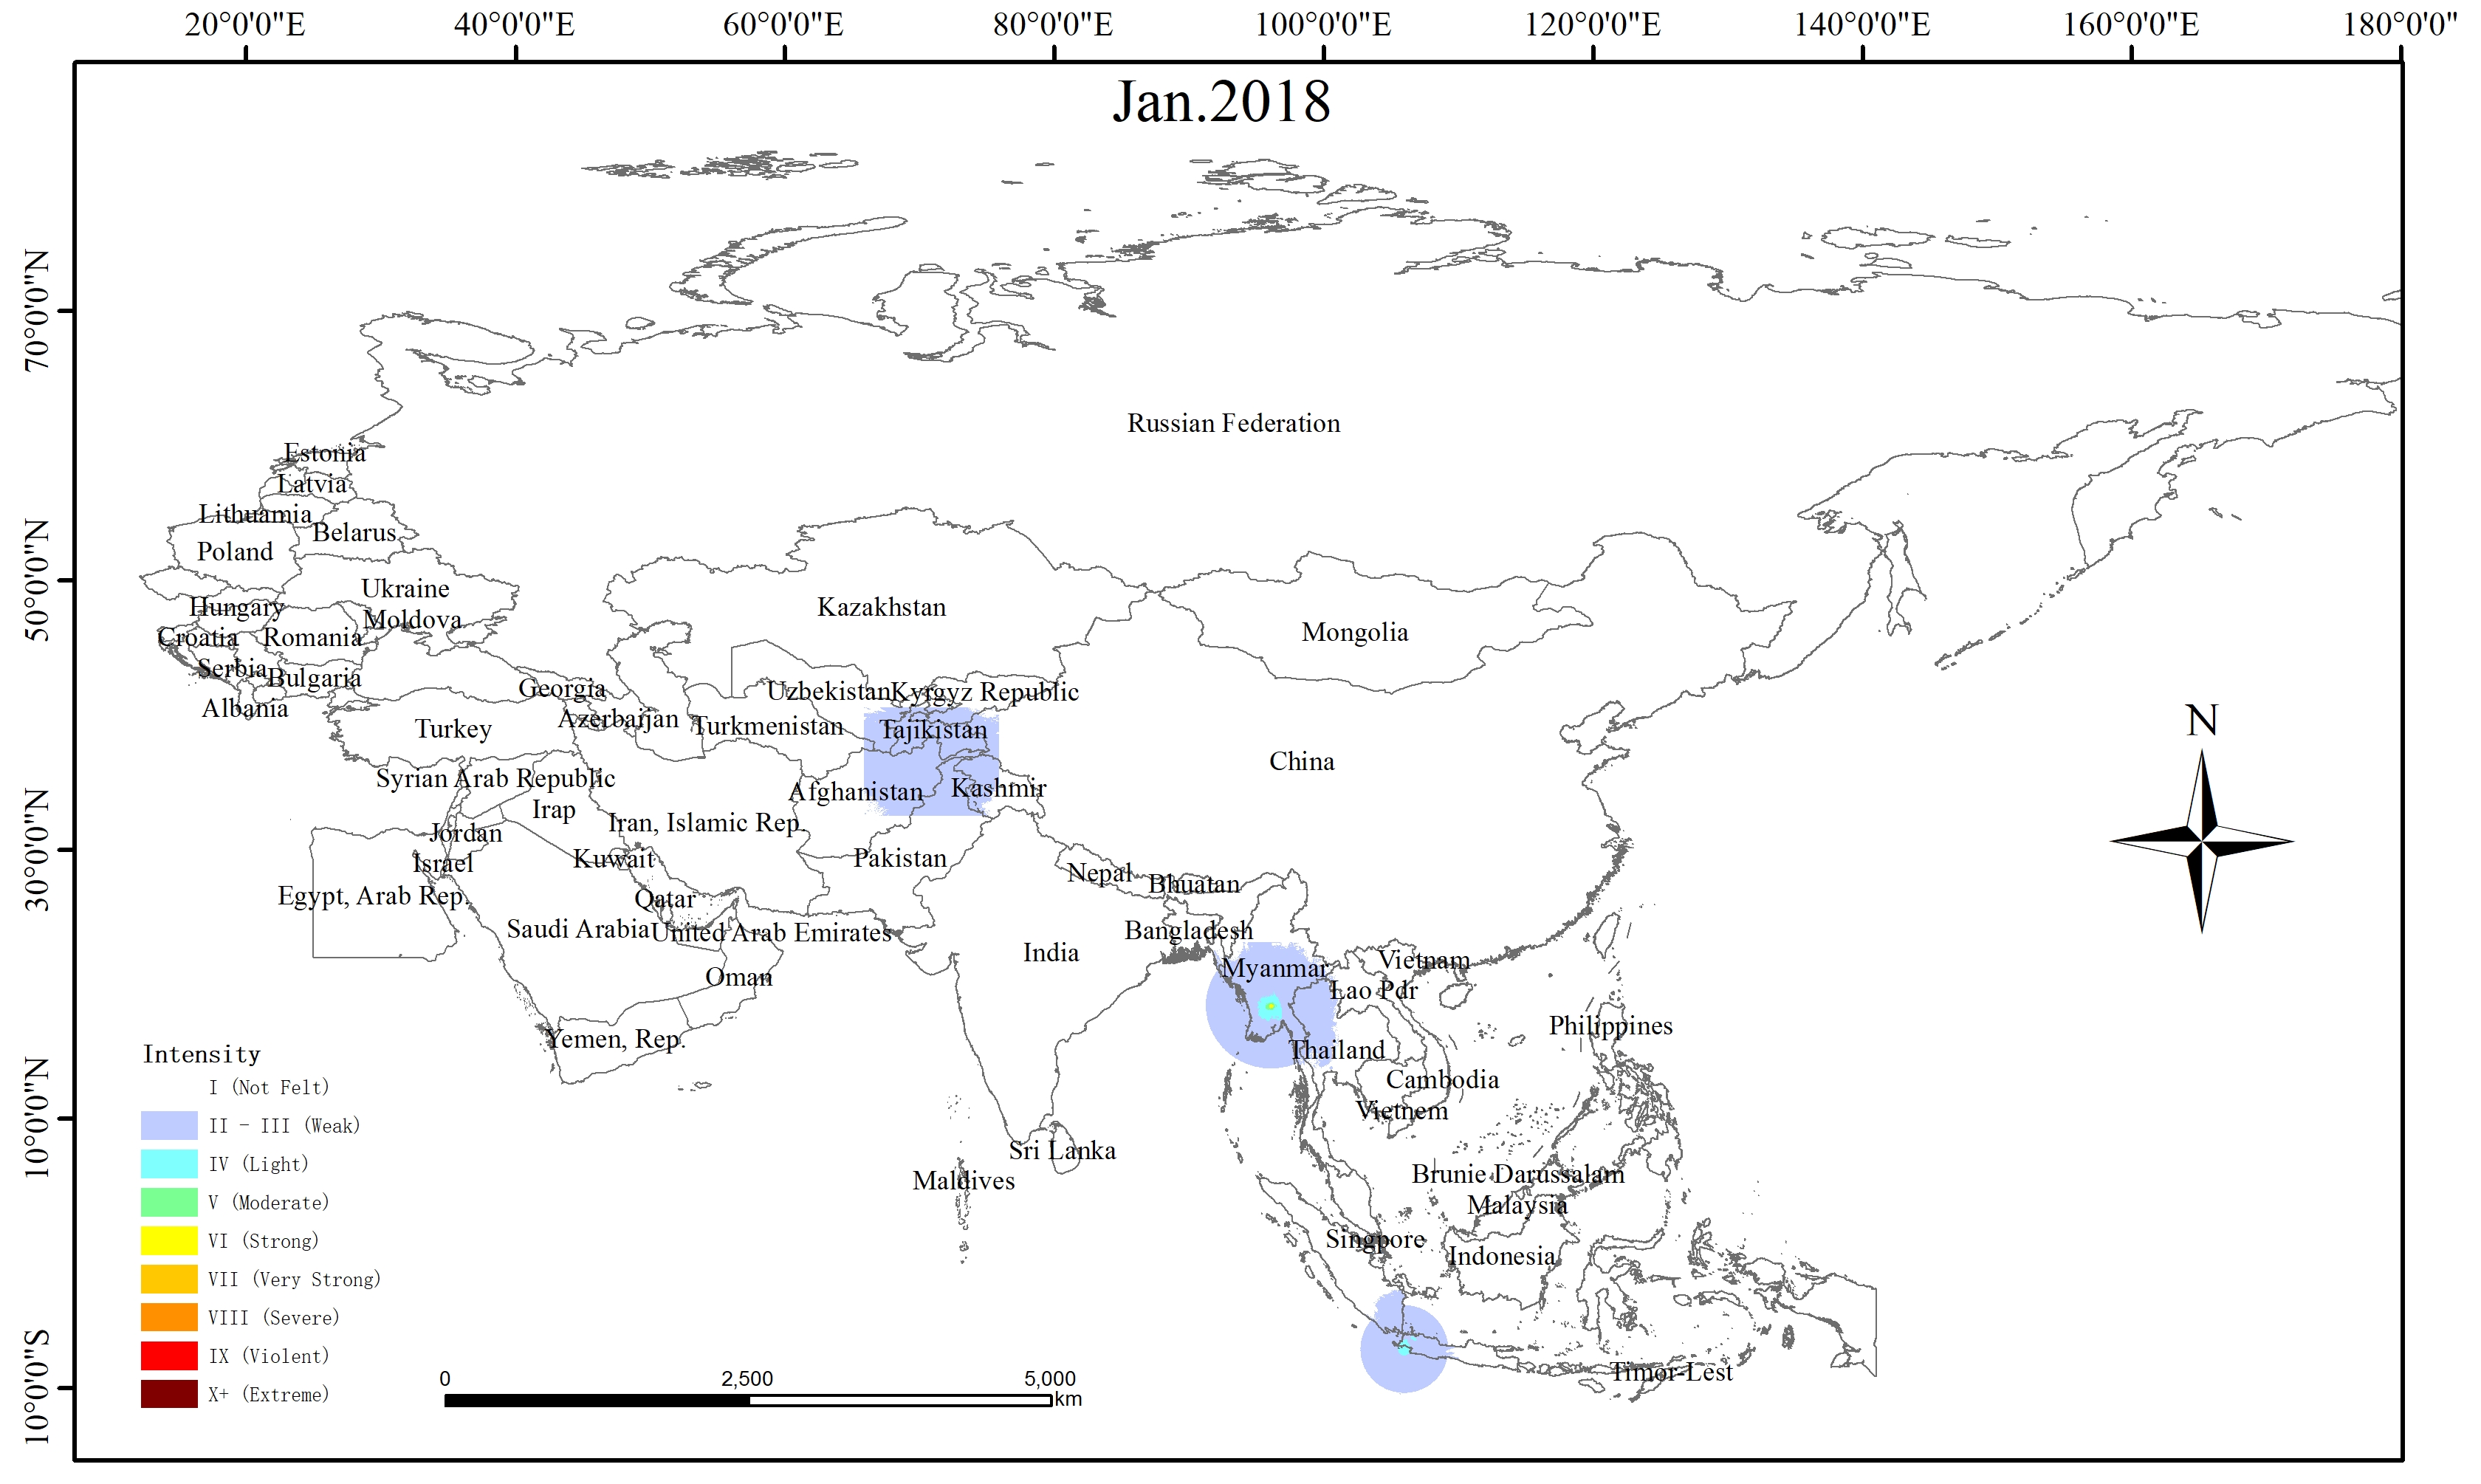 Spatio-temporal Distribution of Earthquake Disaster in the Belt and Road Area in 2018